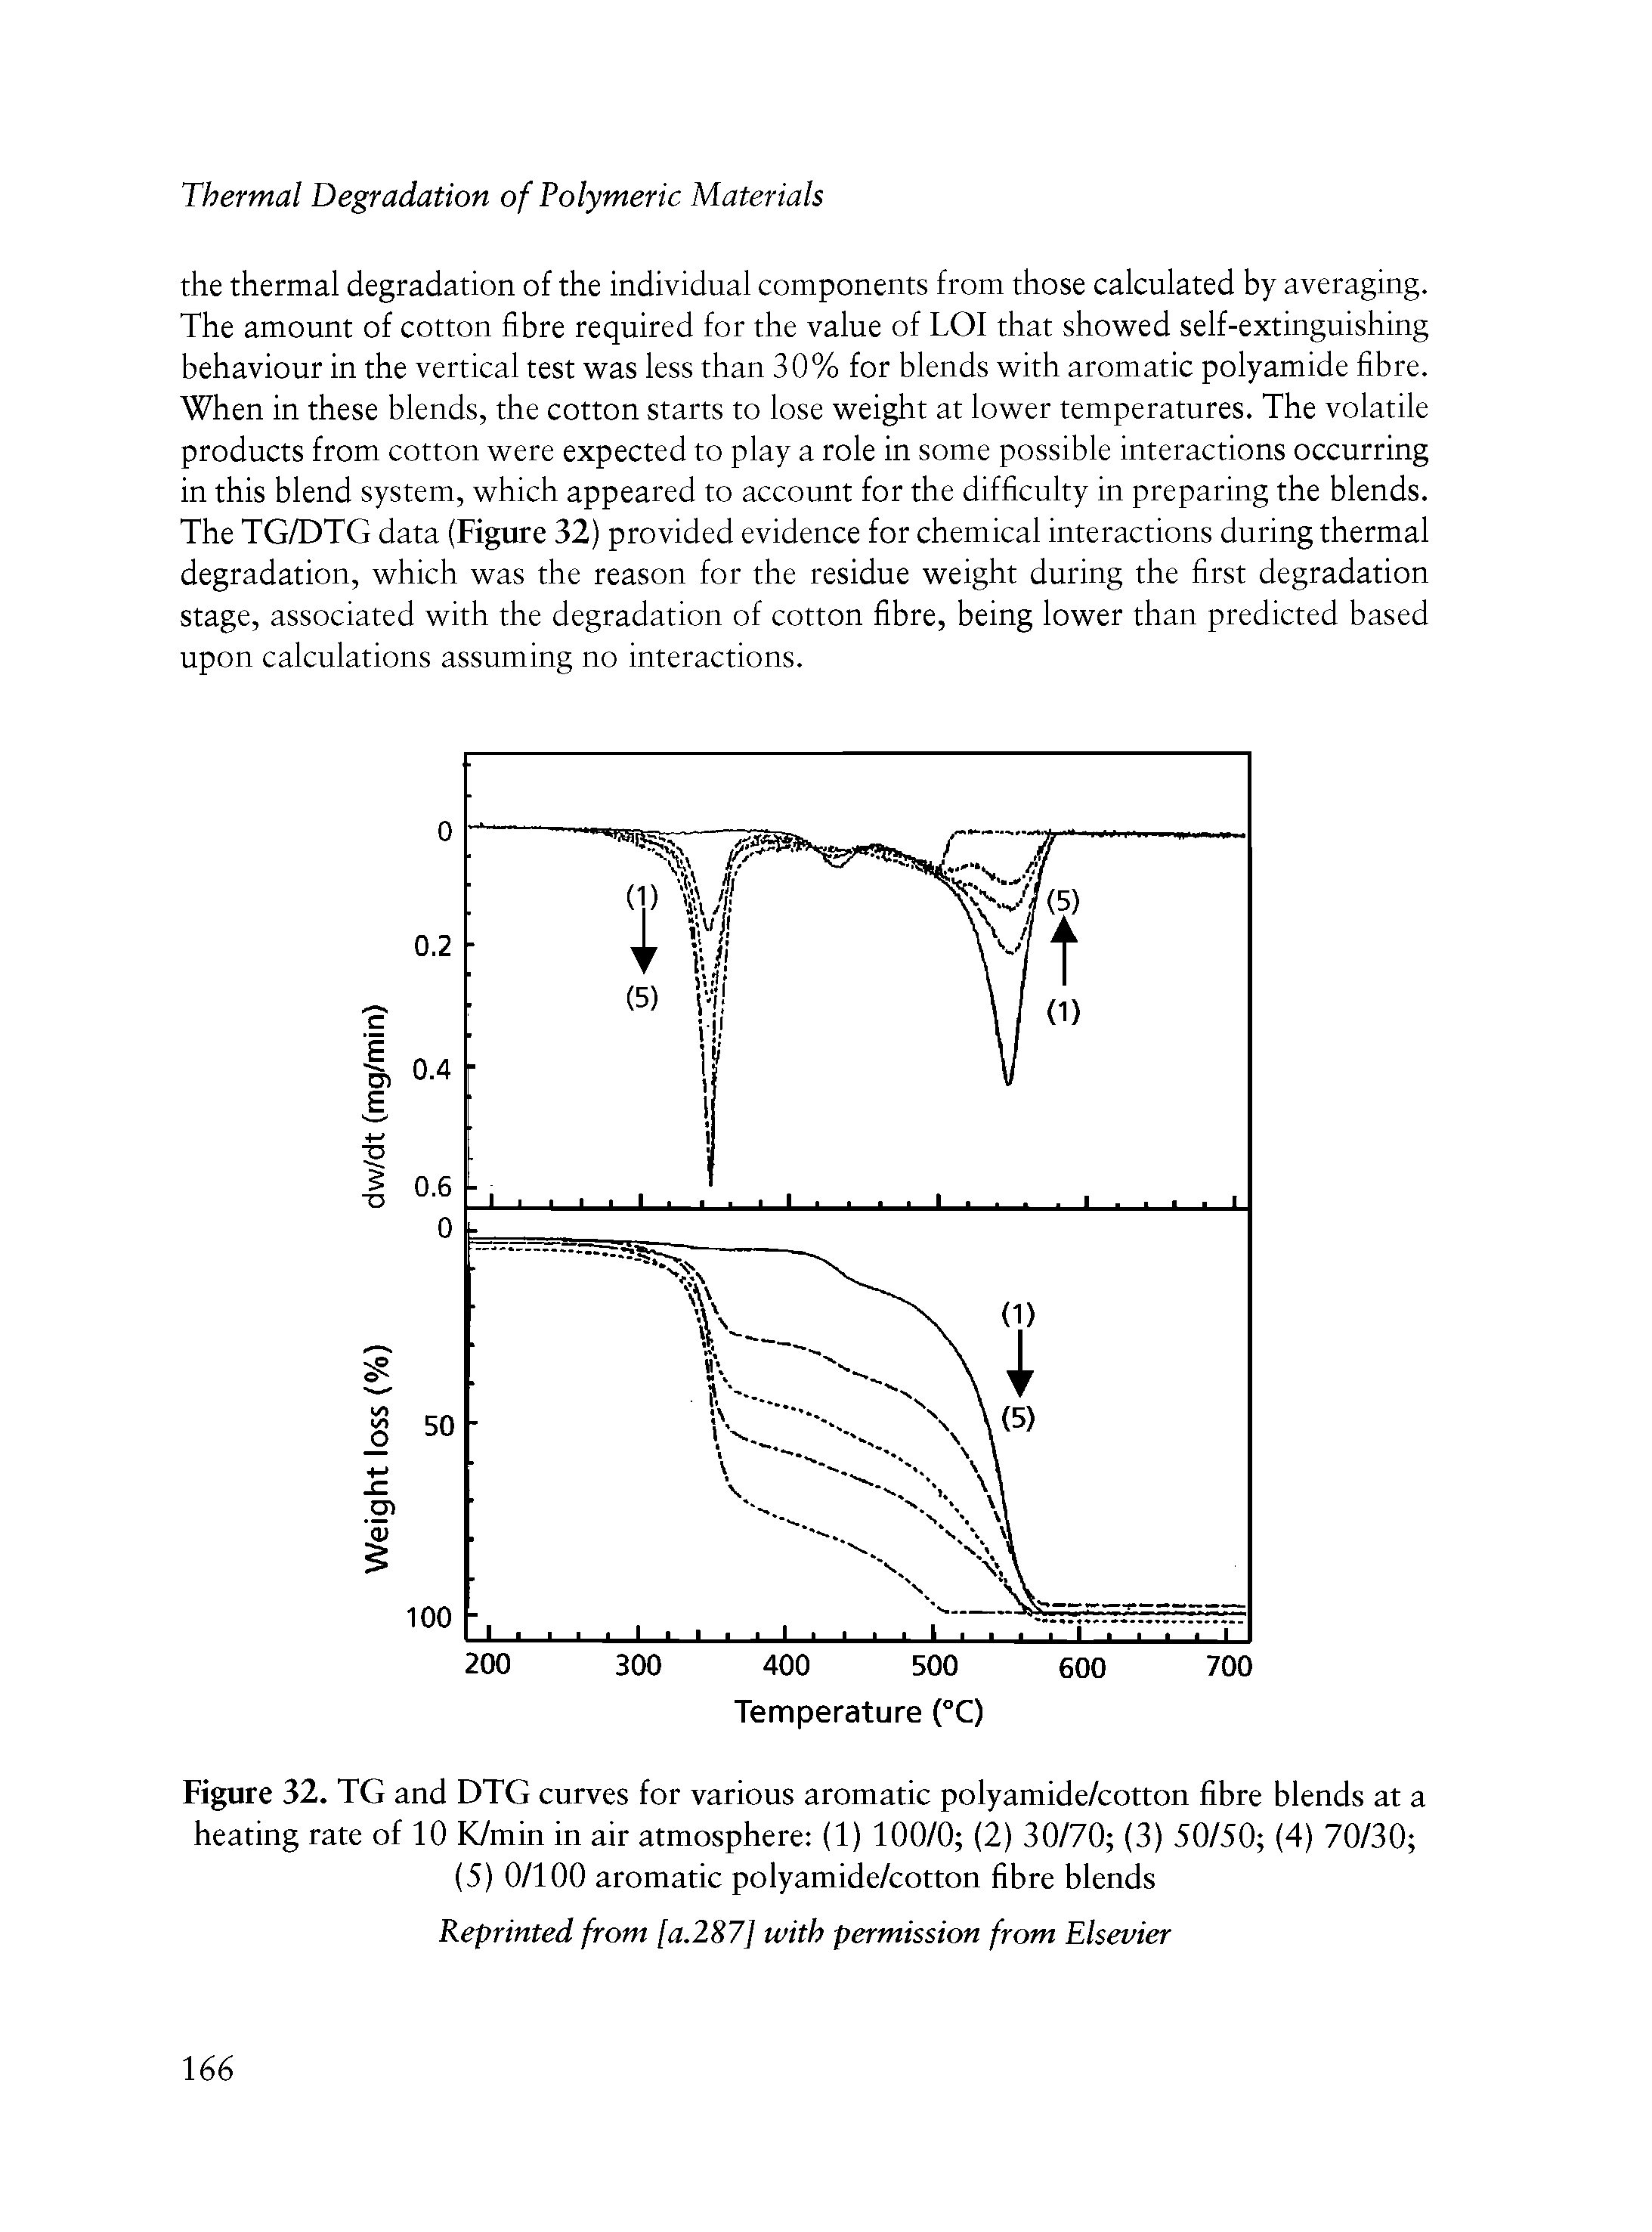 Figure 32. TG and DTG curves for various aromatic polyamide/cotton fibre blends at a heating rate of 10 K/min in air atmosphere (1) 100/0 (2) 30/70 (3) 50/50 (4) 70/30 (5) 0/100 aromatic polyamide/cotton fibre blends...